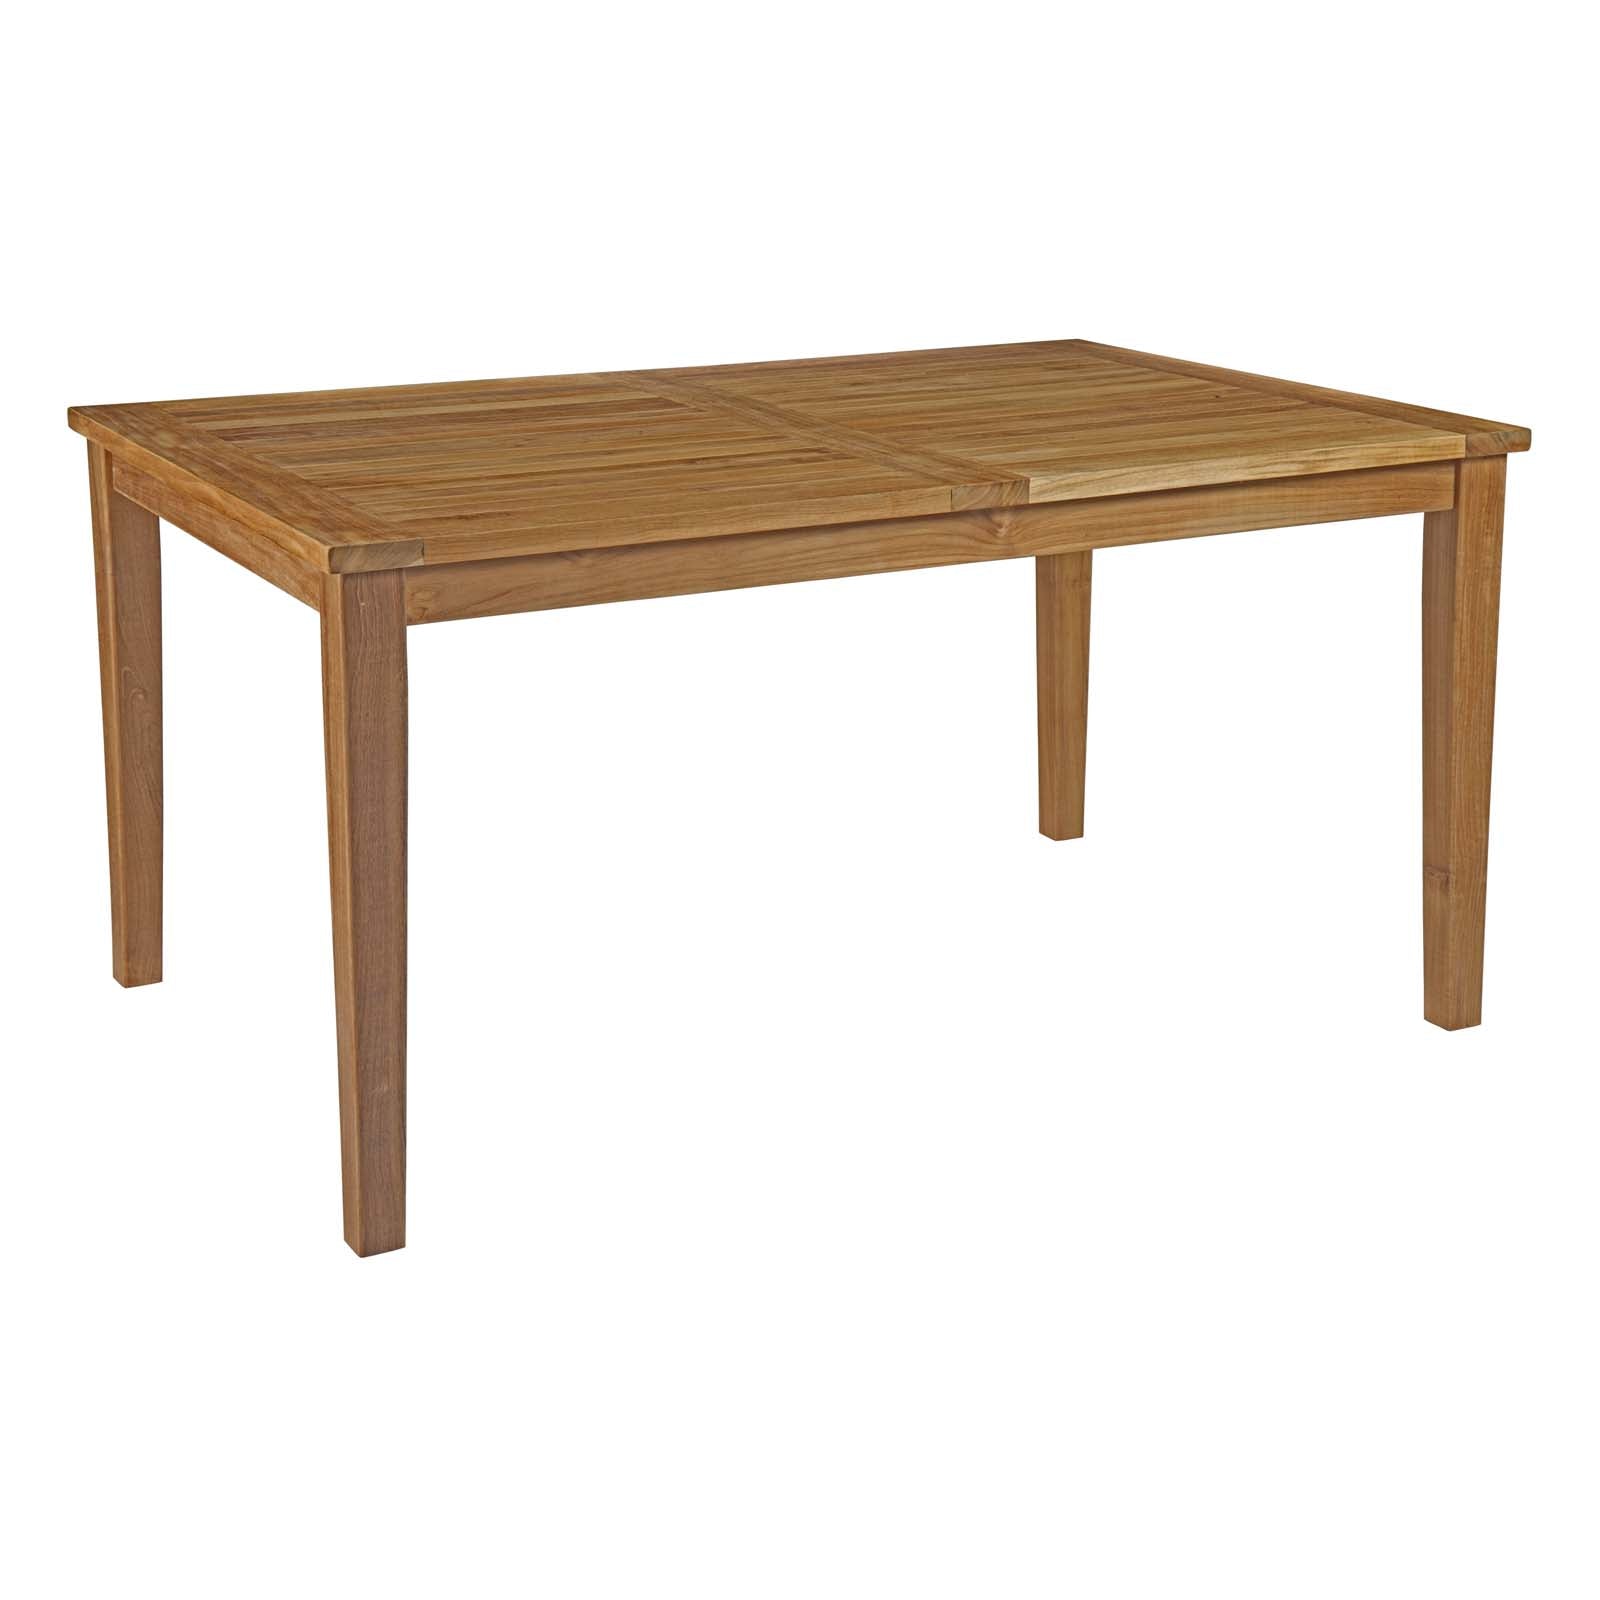 Marina Outdoor Patio Teak Dining Table-Outdoor Dining Table-Modway-Wall2Wall Furnishings